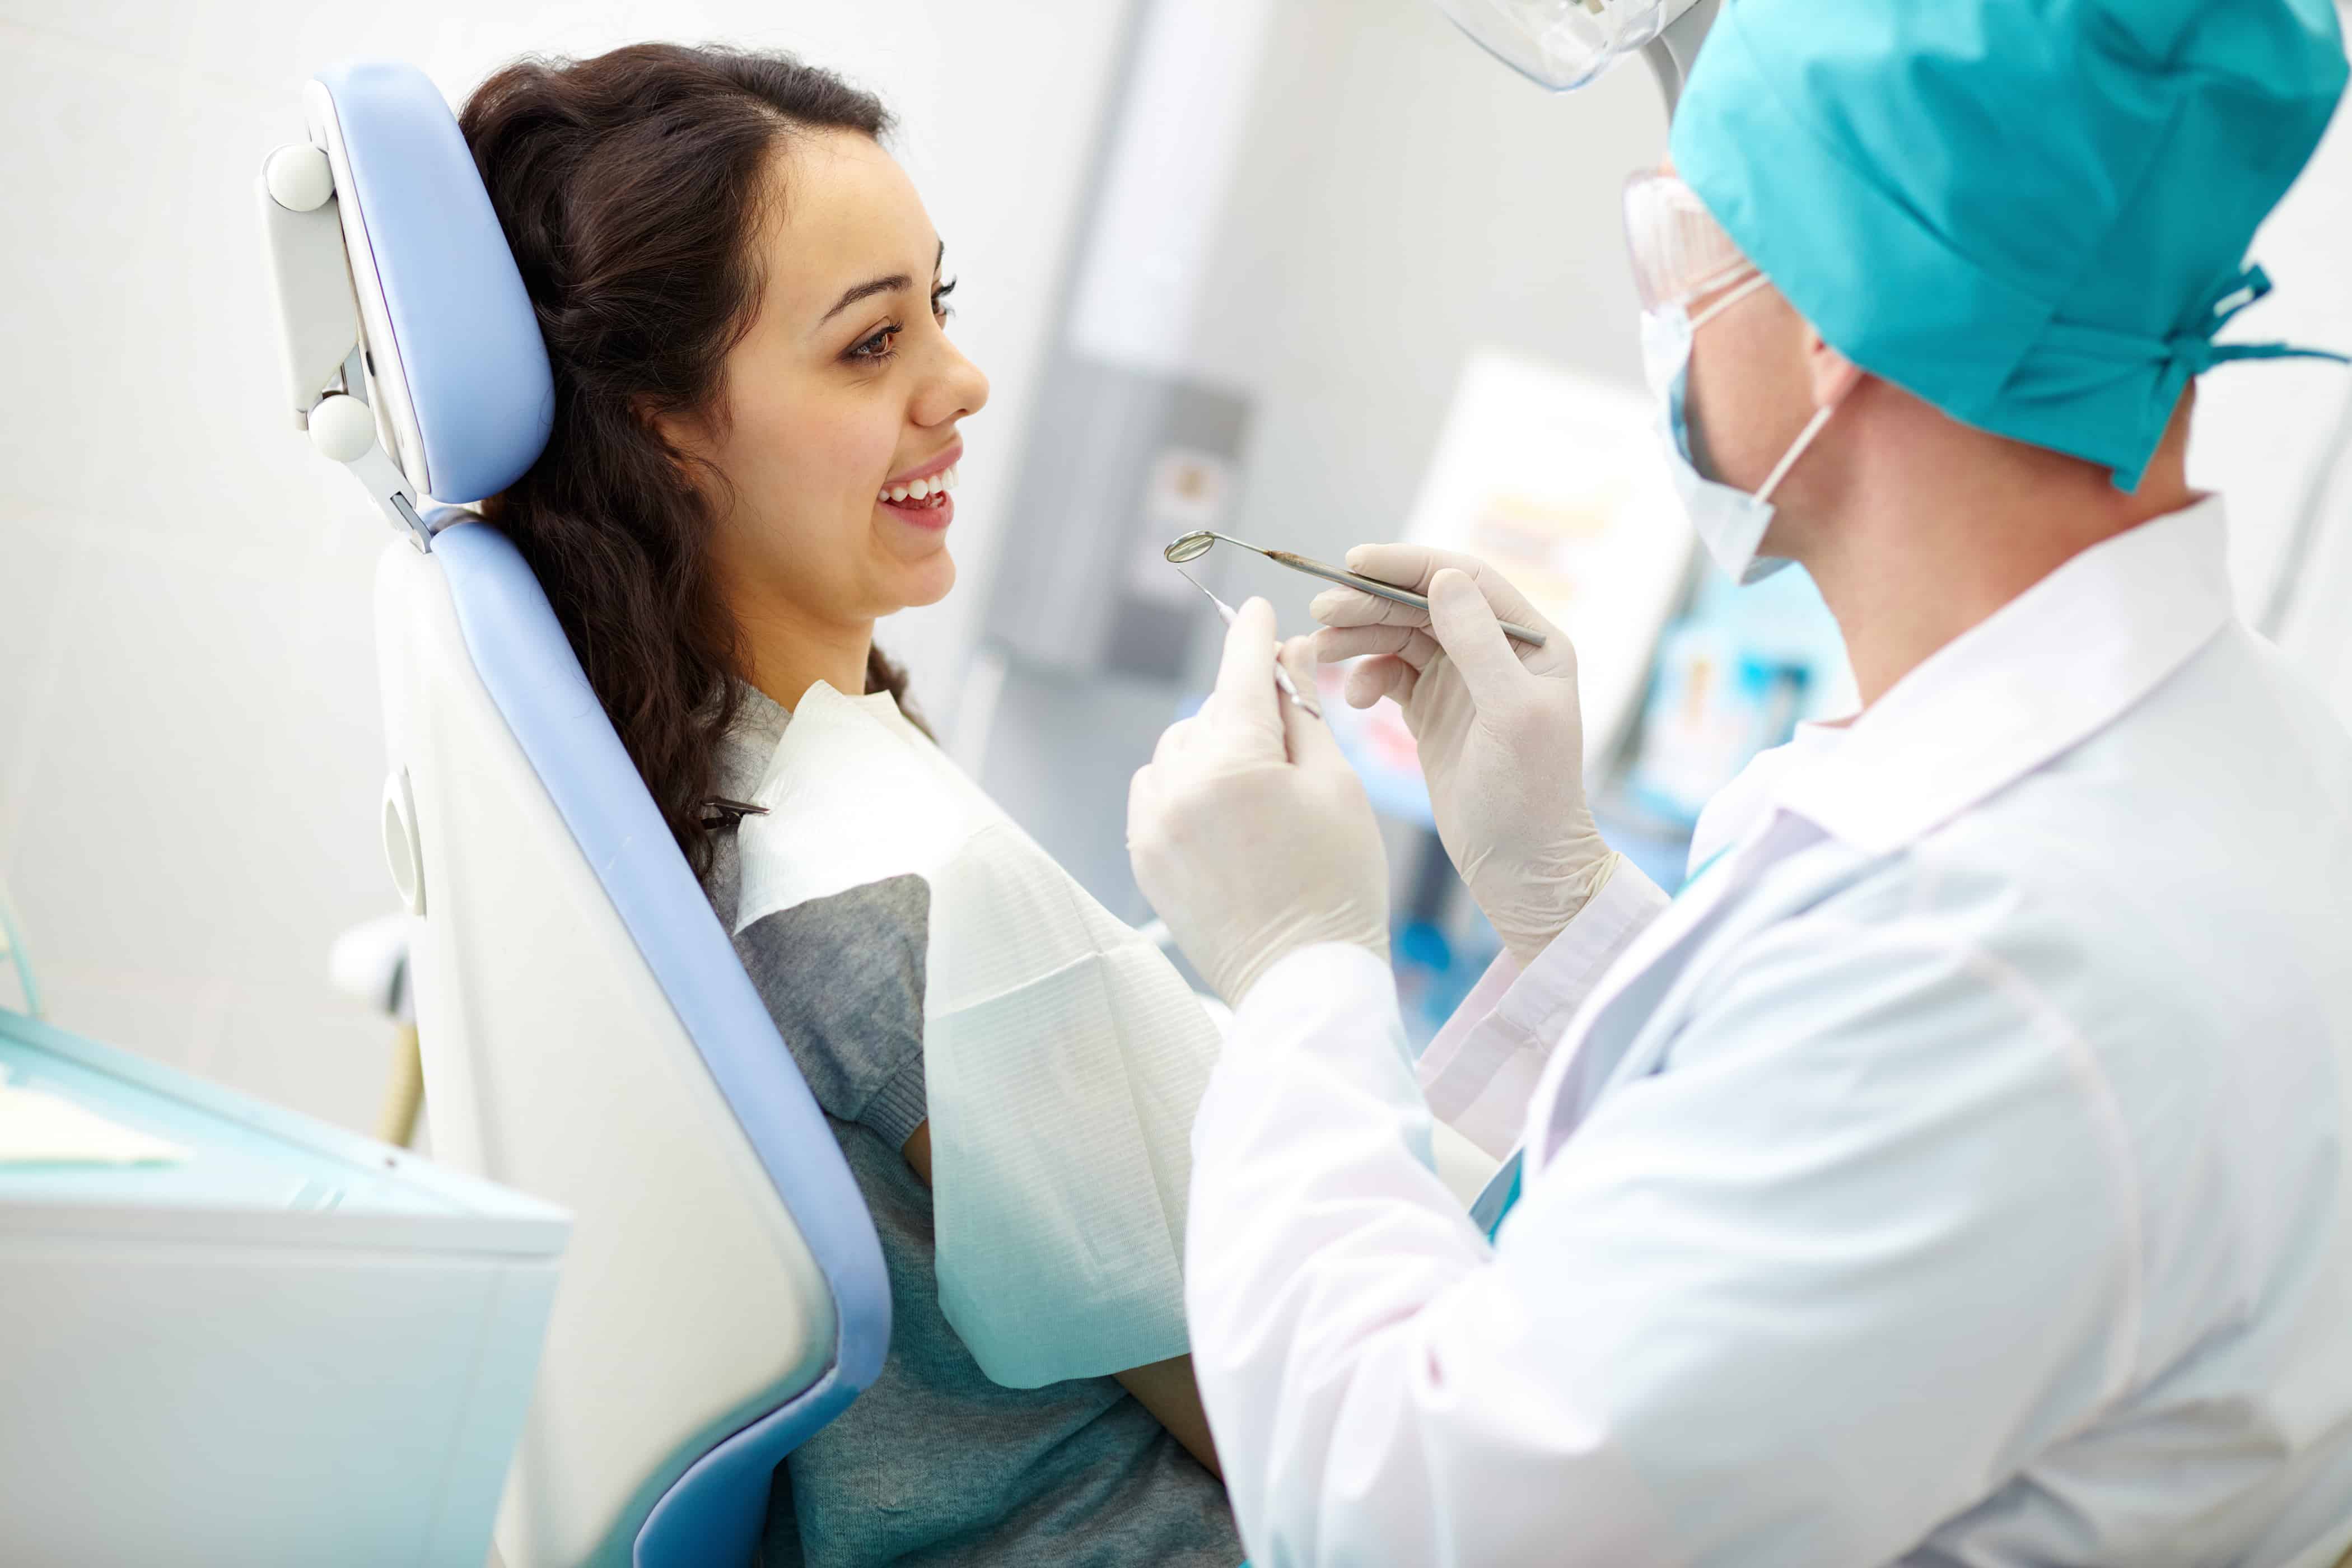 What is Dental care and how to get service in Markham